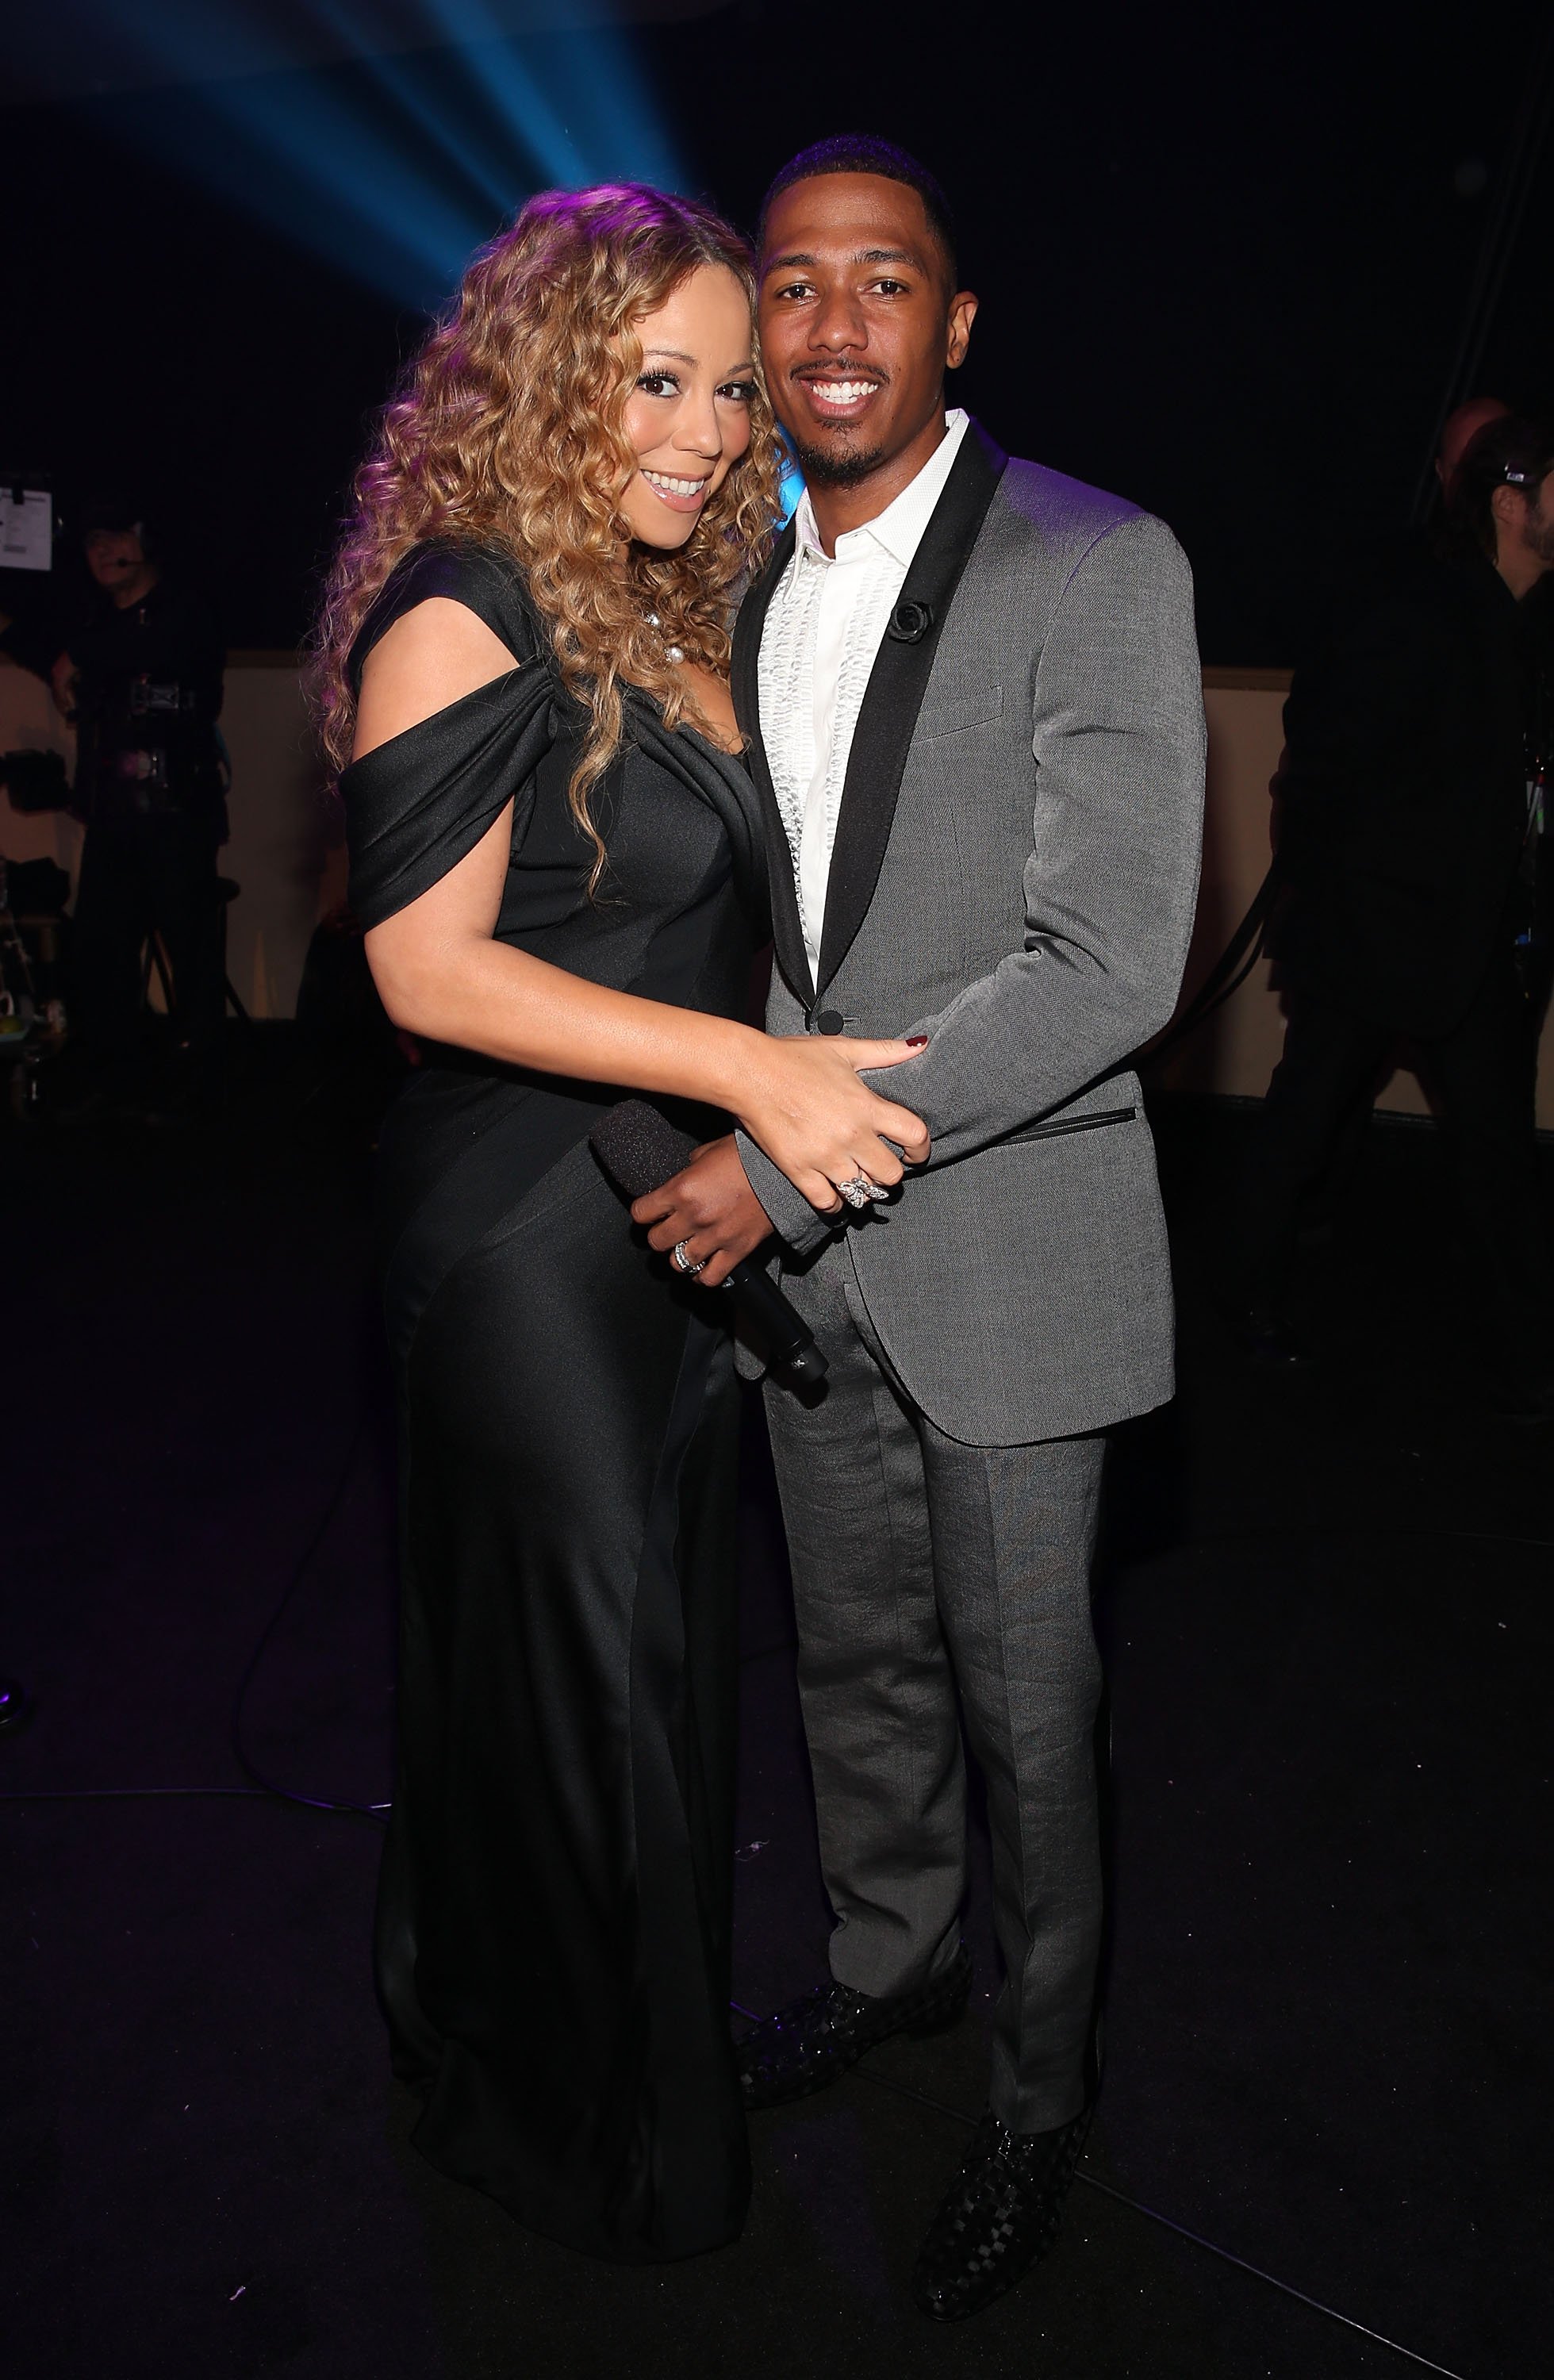 Nick Cannon and Mariah Carey onstage at the 2012 Nickelodeon's TeenNick HALO Awards. | Source: Getty Images